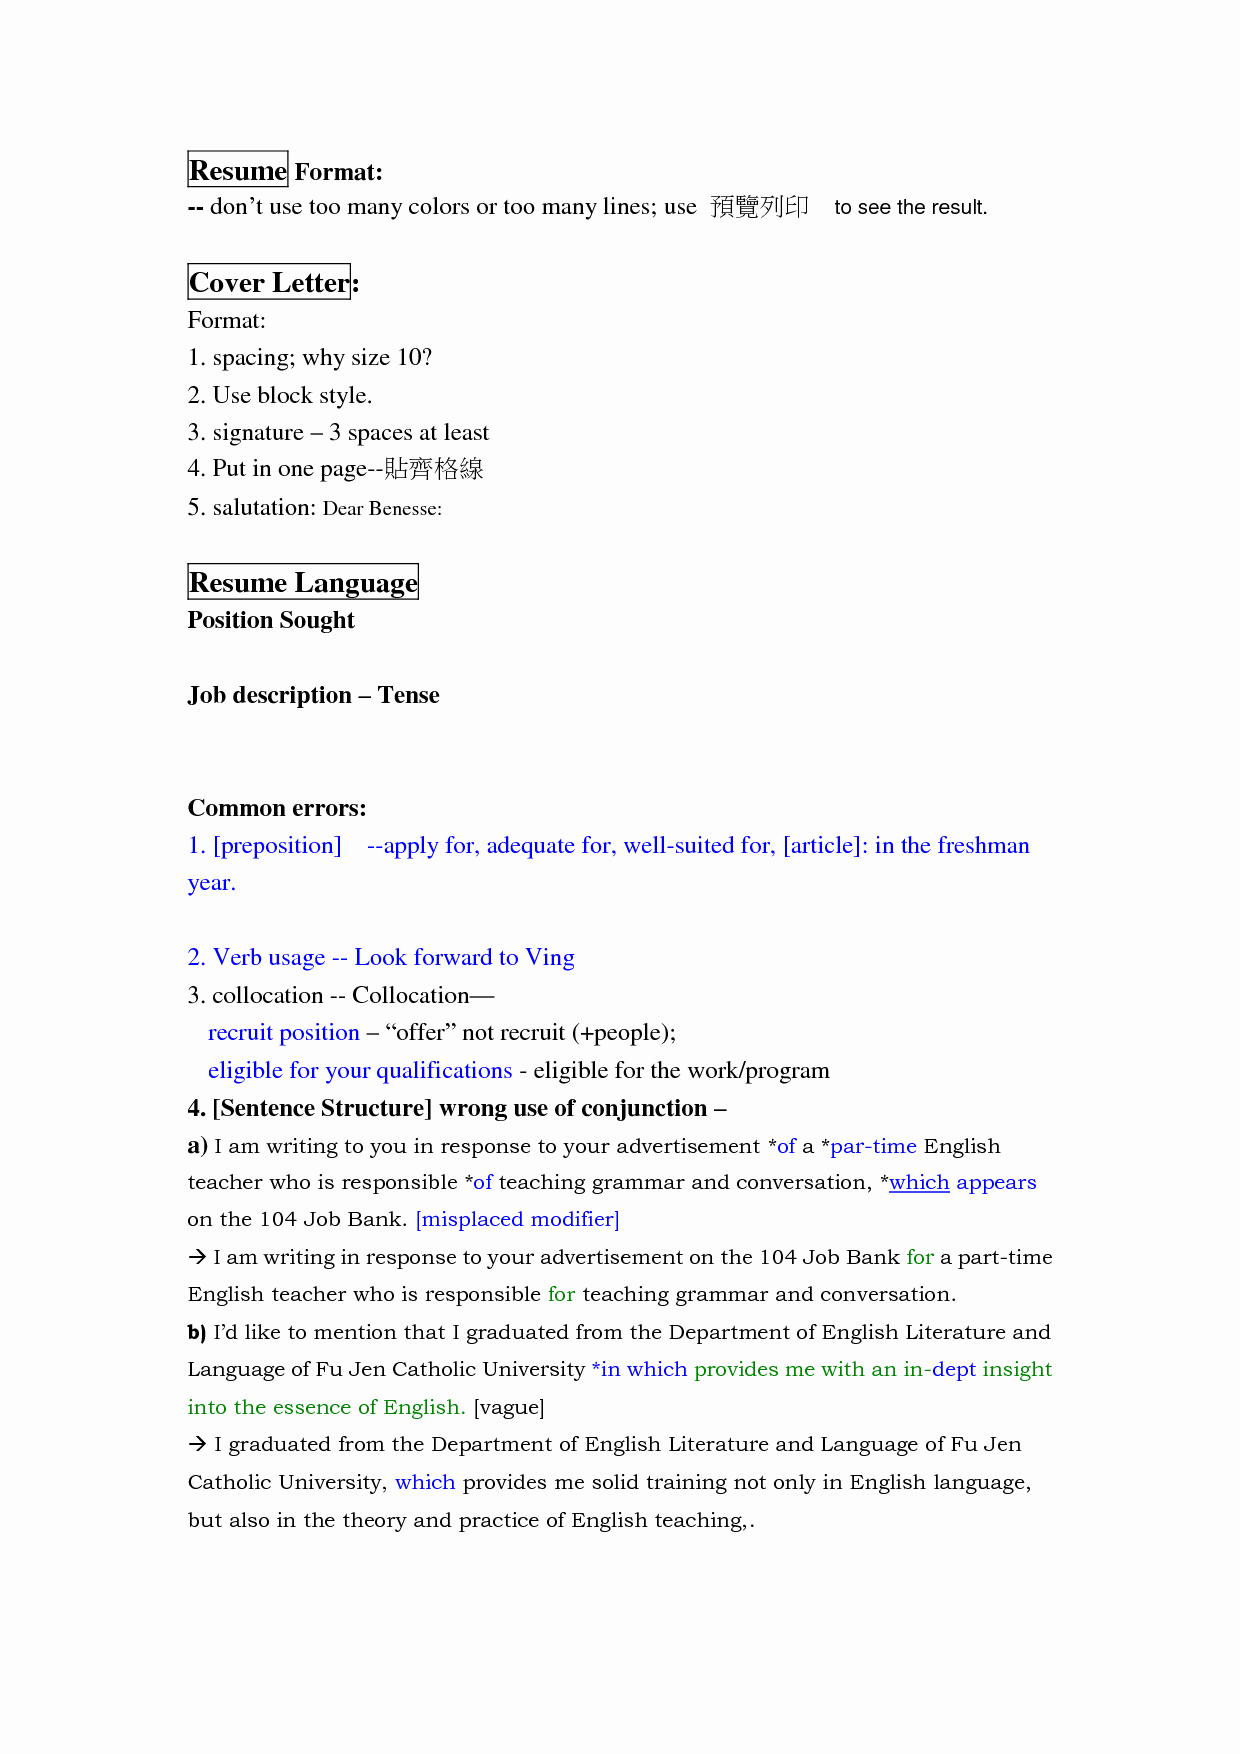 Cover letter single spaced